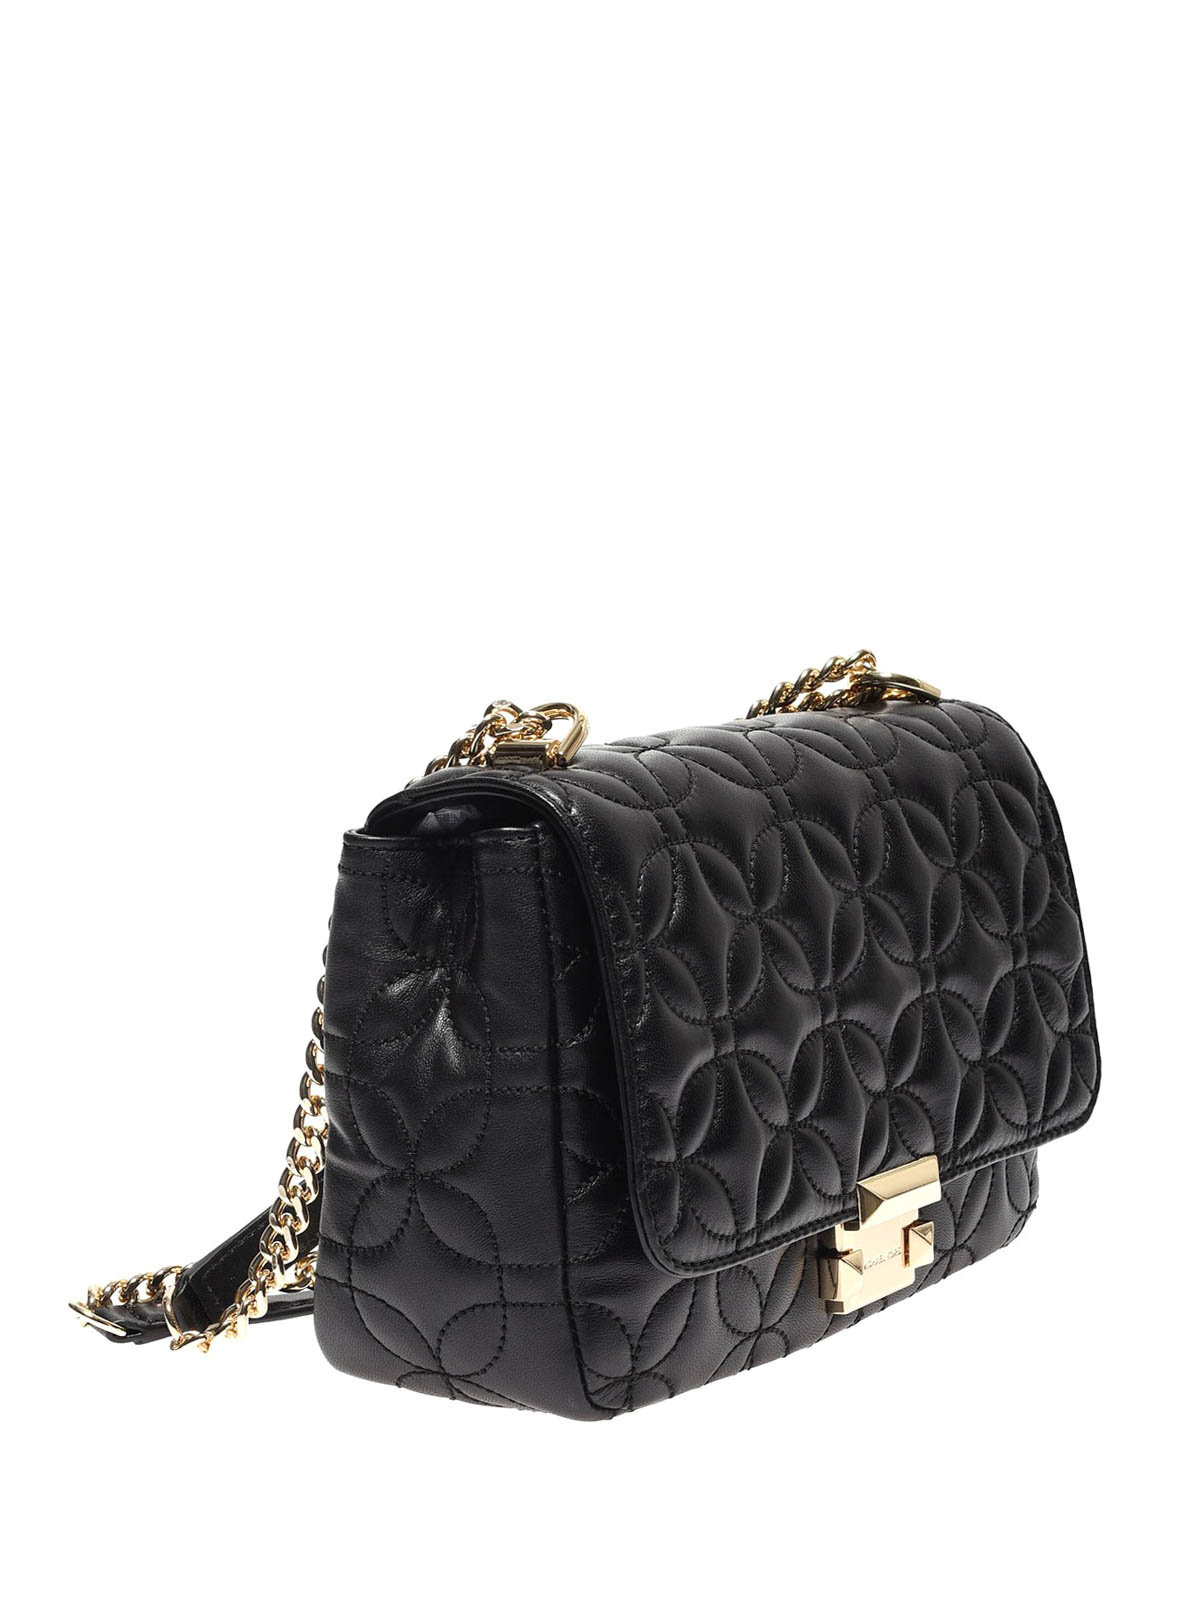 black quilted michael kors purse